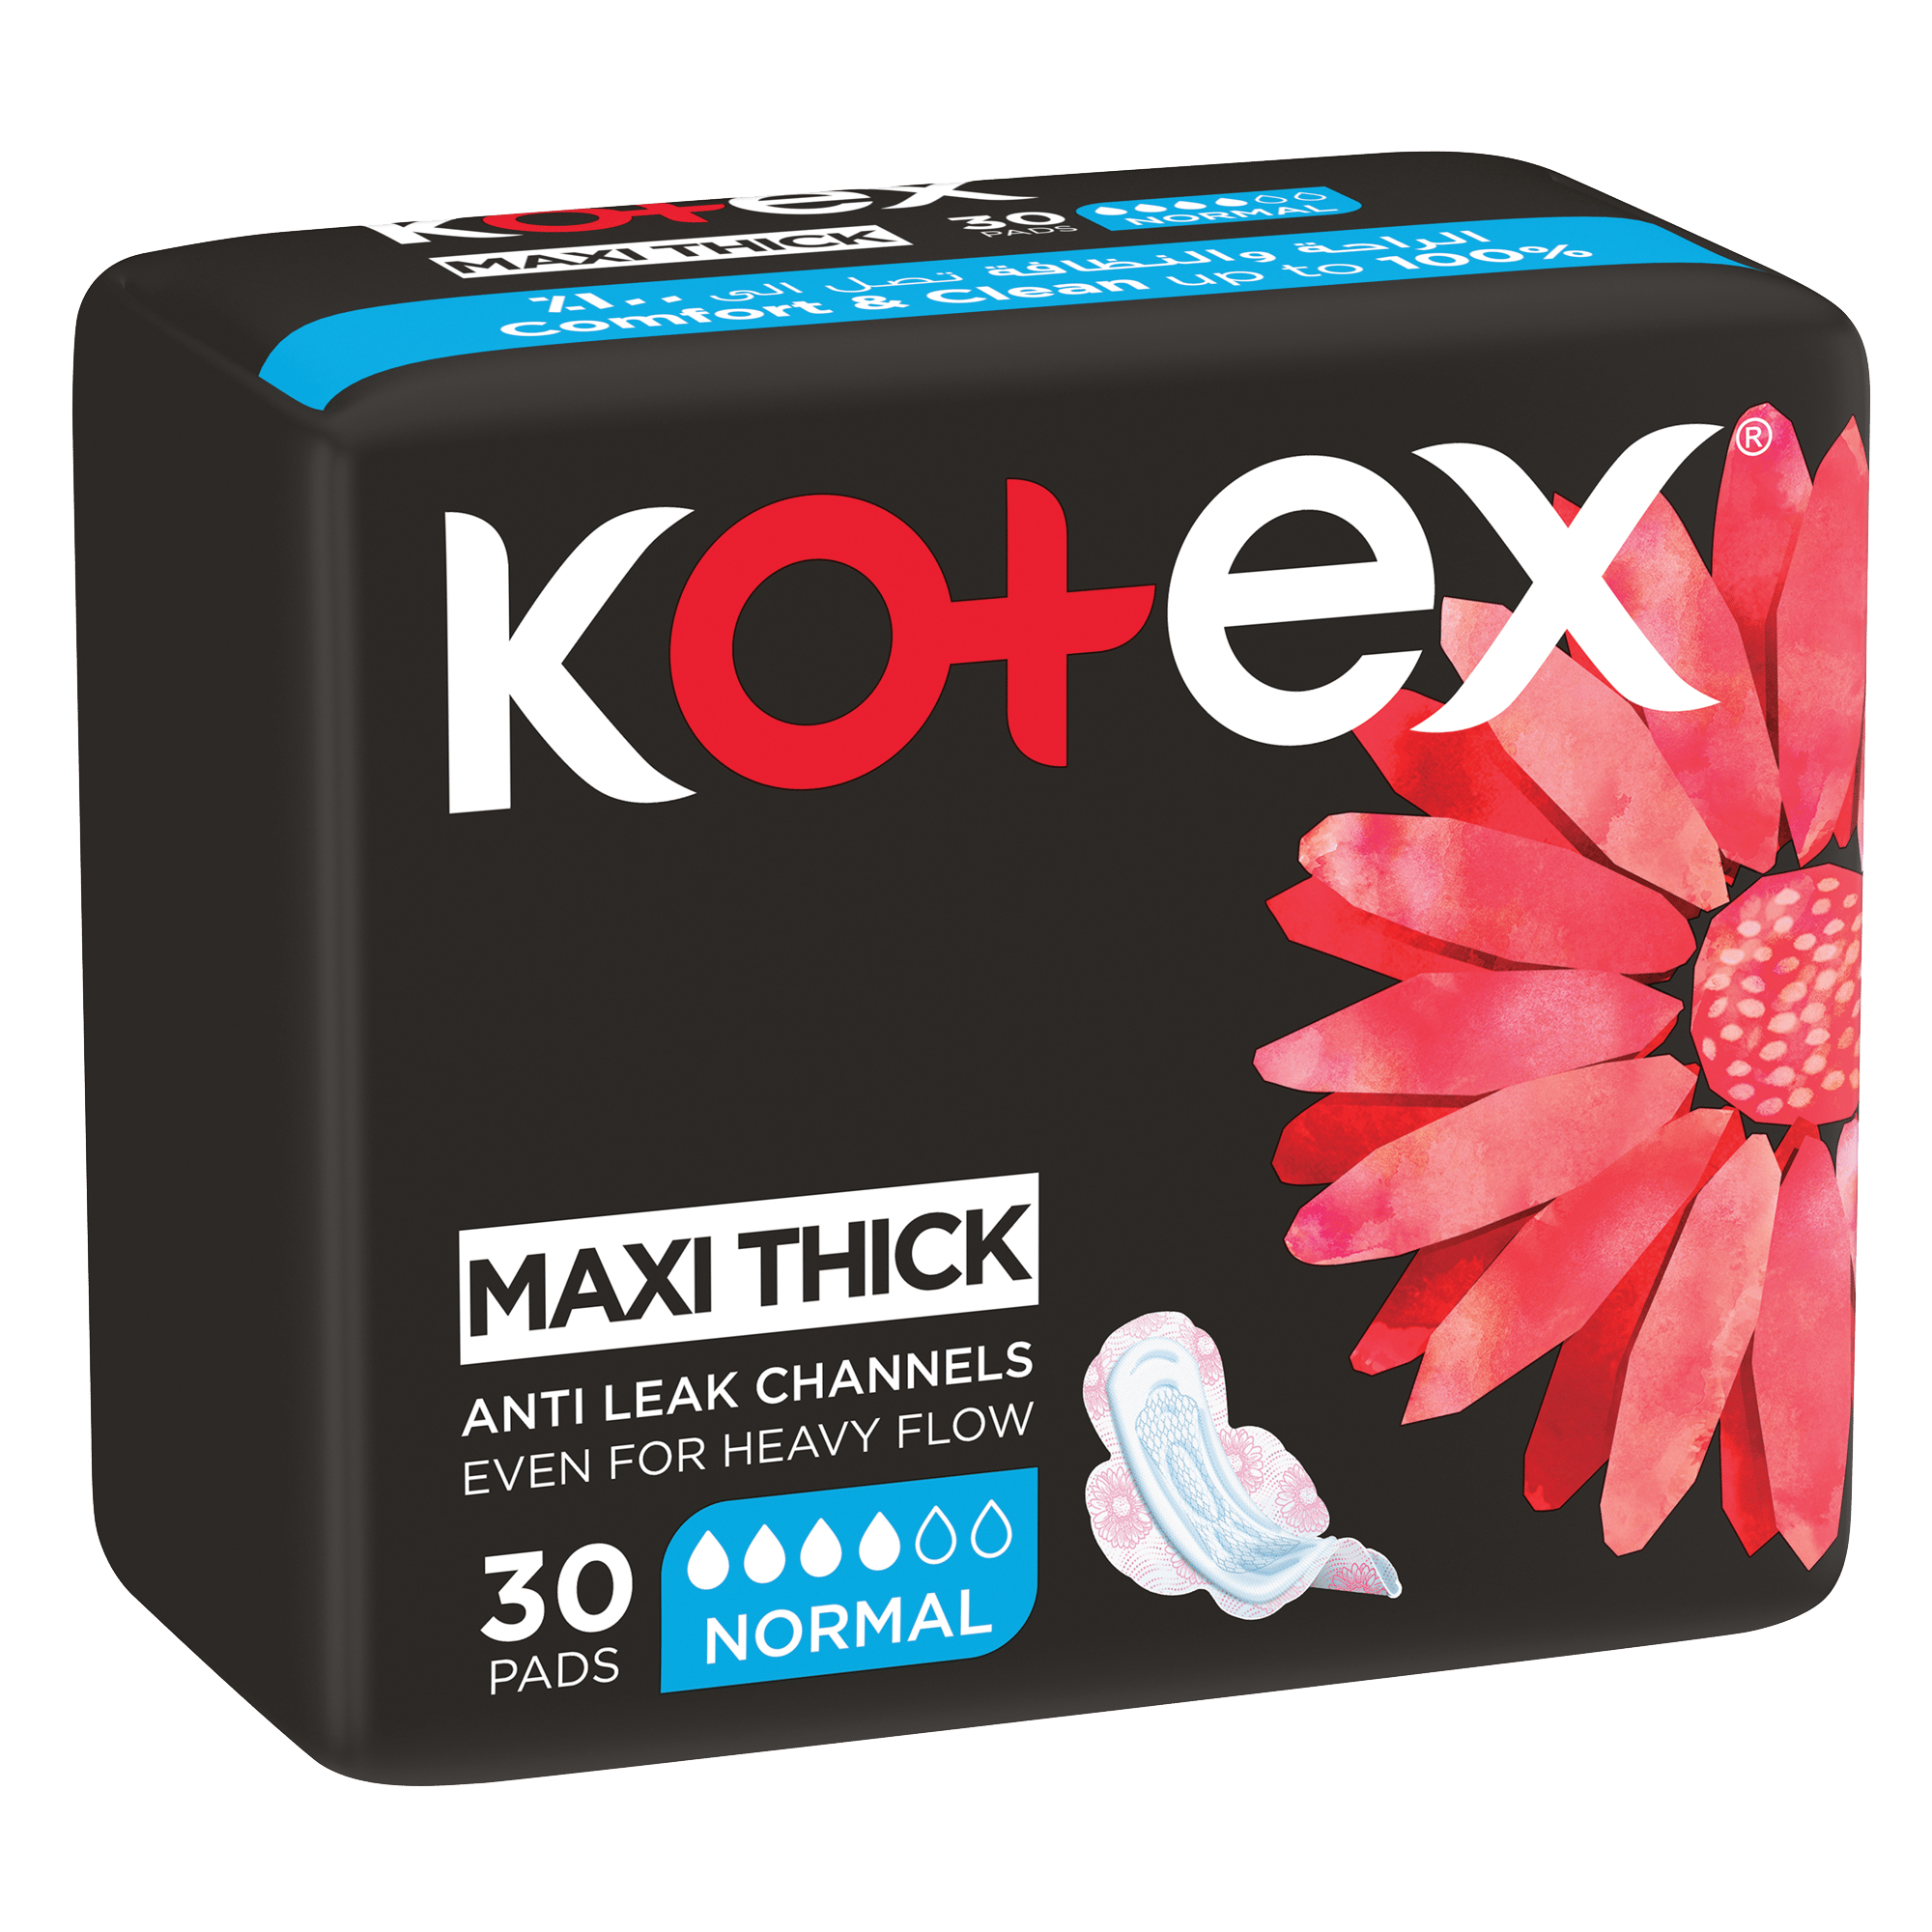 Kotex Maxi Protect Thick Pads, Normal Size Sanitary Pads with Wings, 30 Sanitary Pads